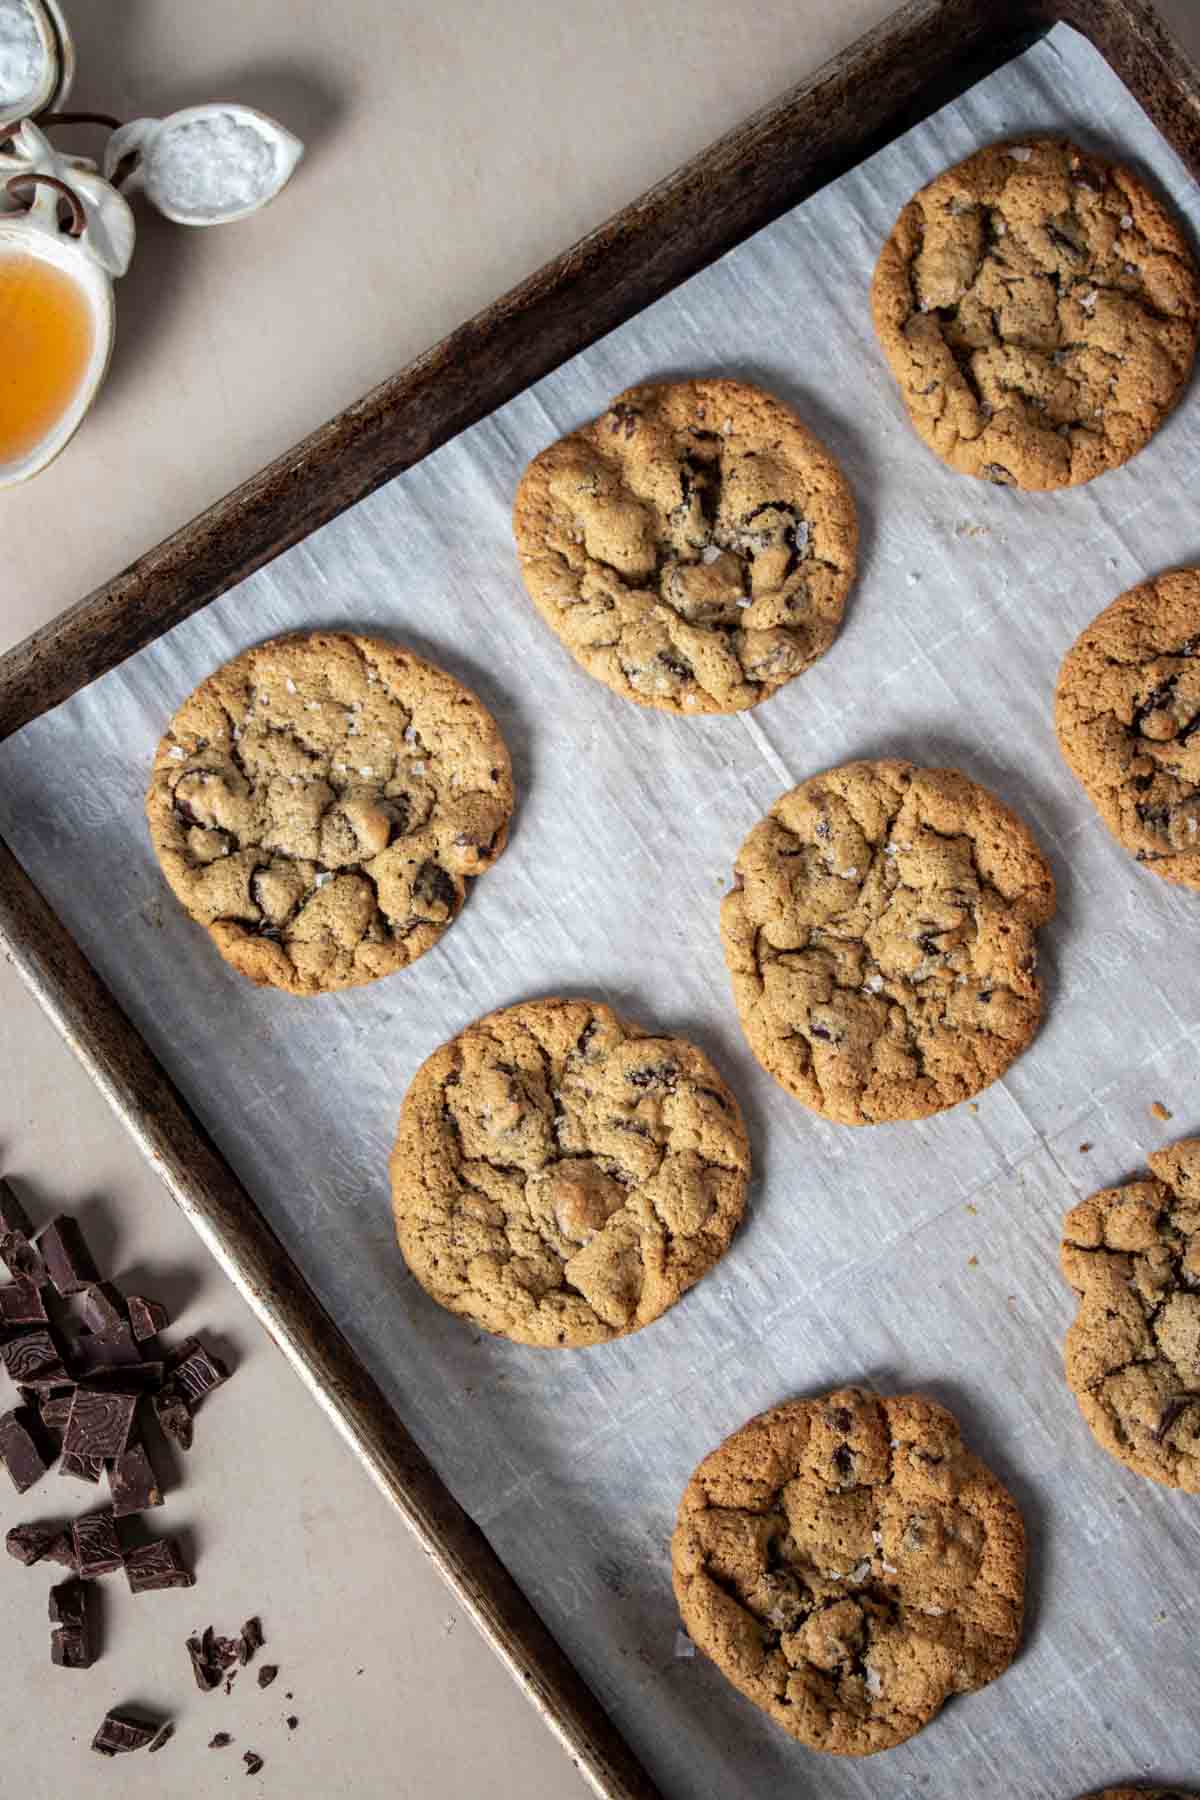 A baking sheet with parchment on it with baked chocolate chip cookies on a tan surface.